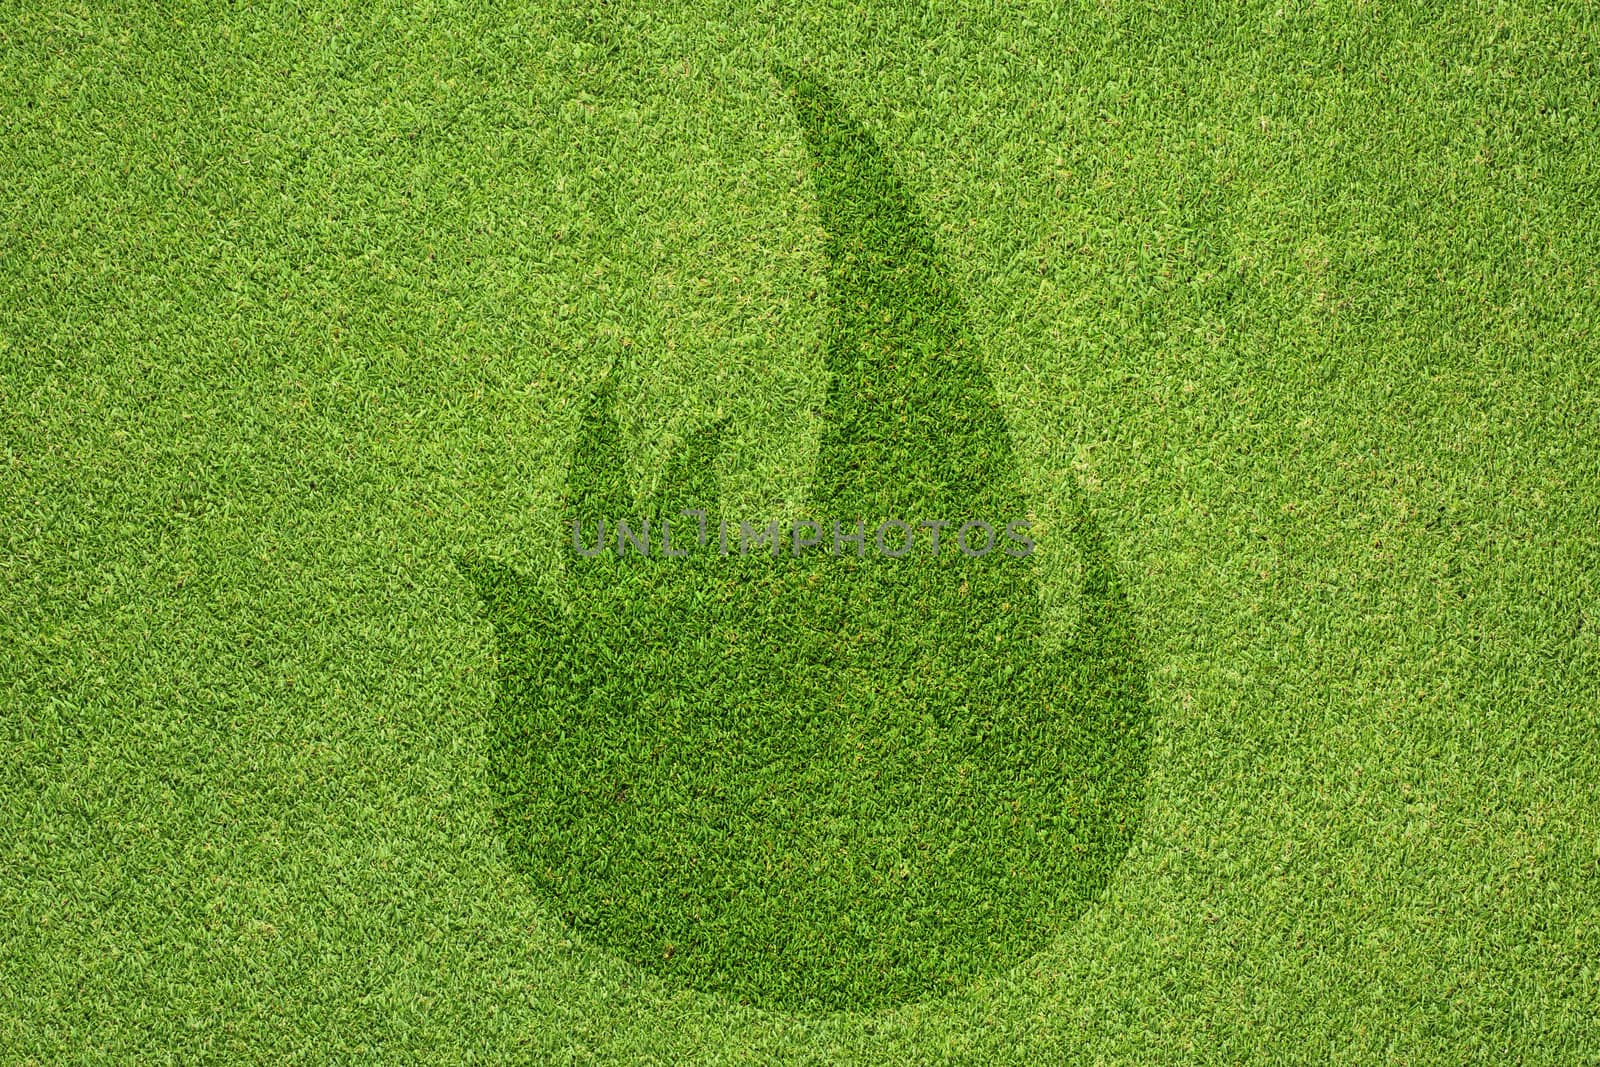 Fire icon on green grass texture and background 